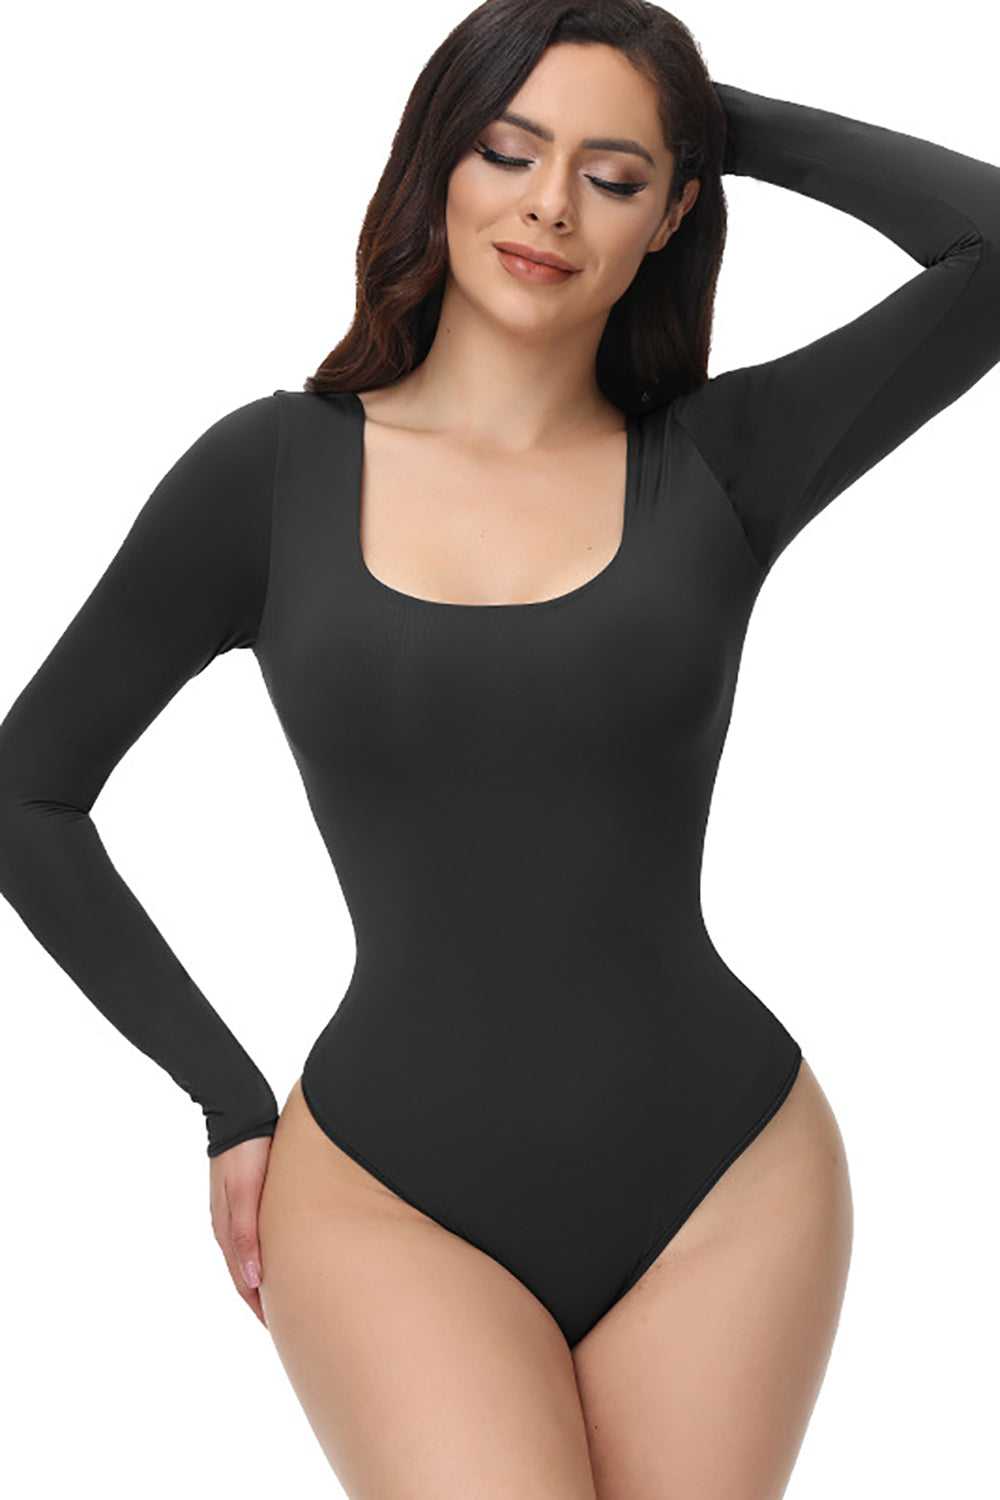 CLOZOZ Long Sleeve Bodysuit Shapewear Tummy Control Square Neck Seamless  Bodysuits for Women Ribbed Knit Body Suits - Coupon Codes, Promo Codes,  Daily Deals, Save Money Today